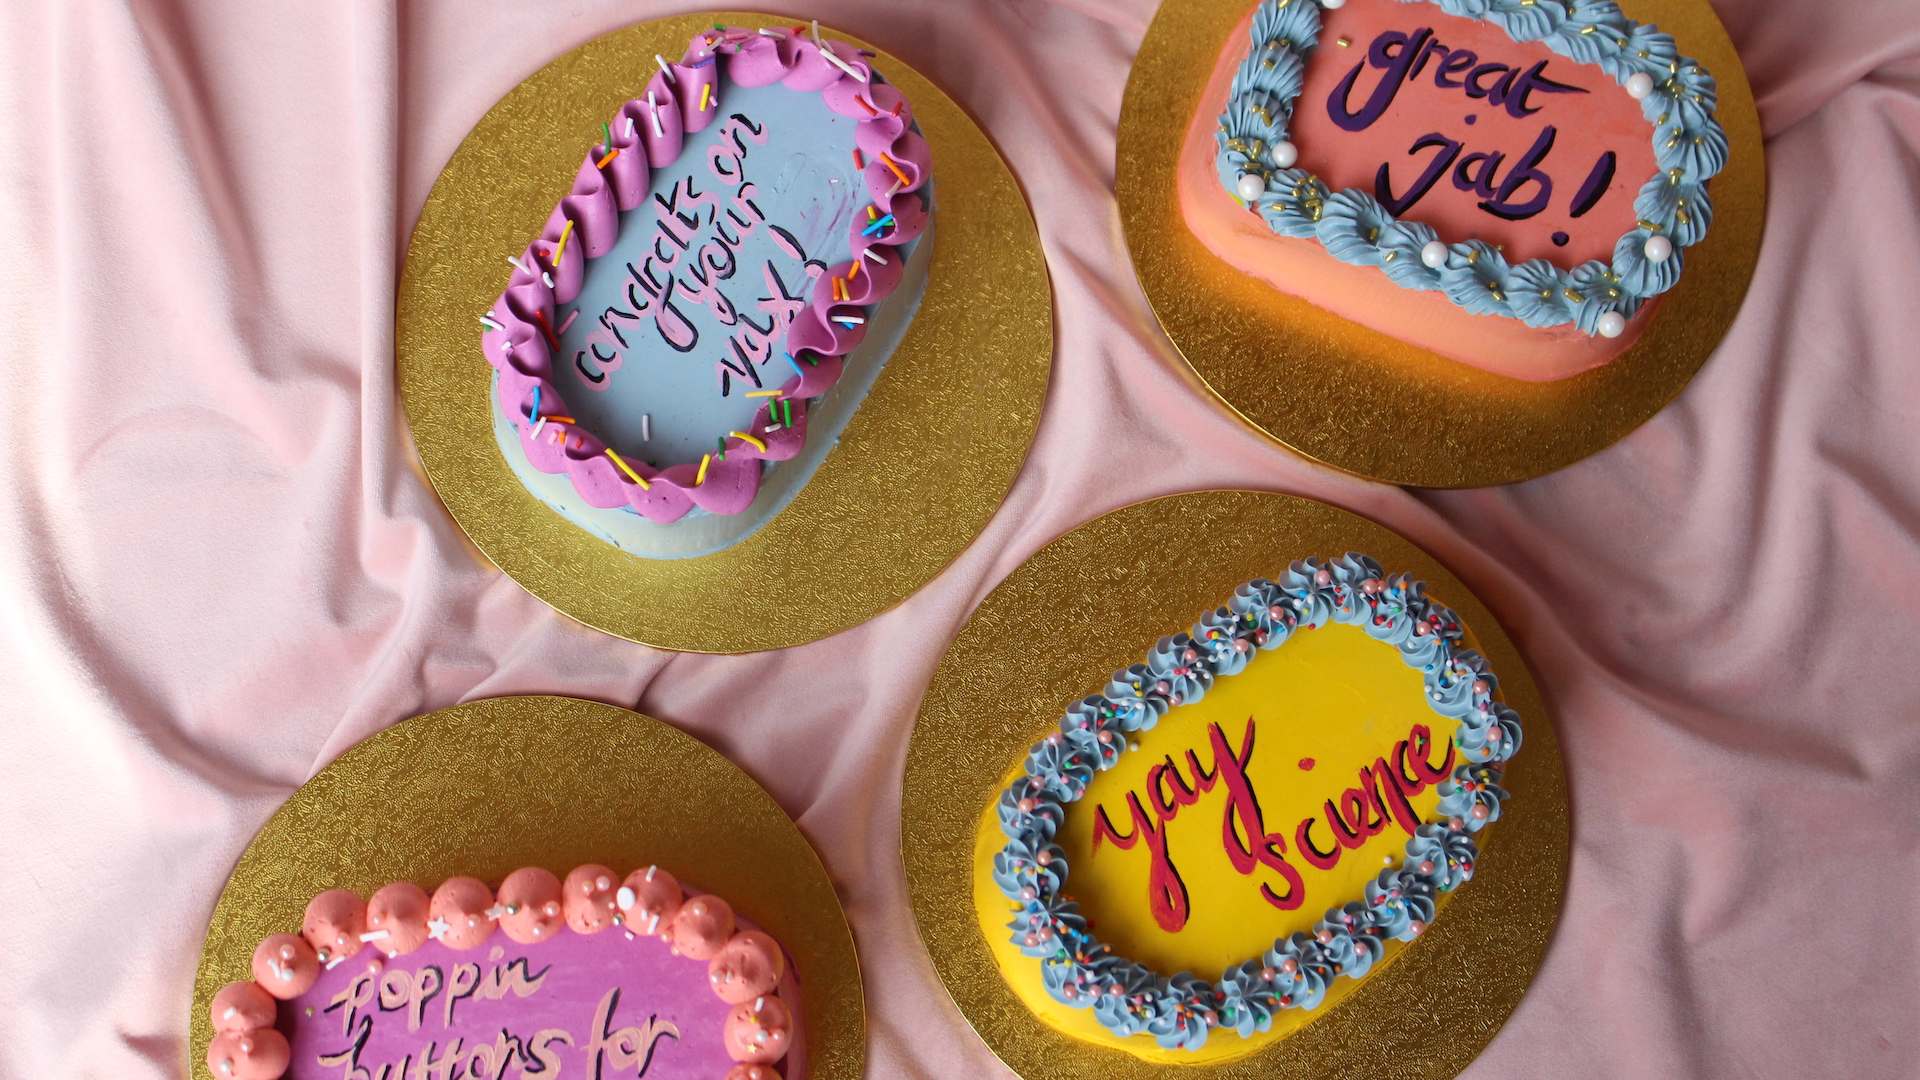 Local Bakery Beurre Is Serving Up a New Line of Cheerful Post-Vax Celebration Cakes